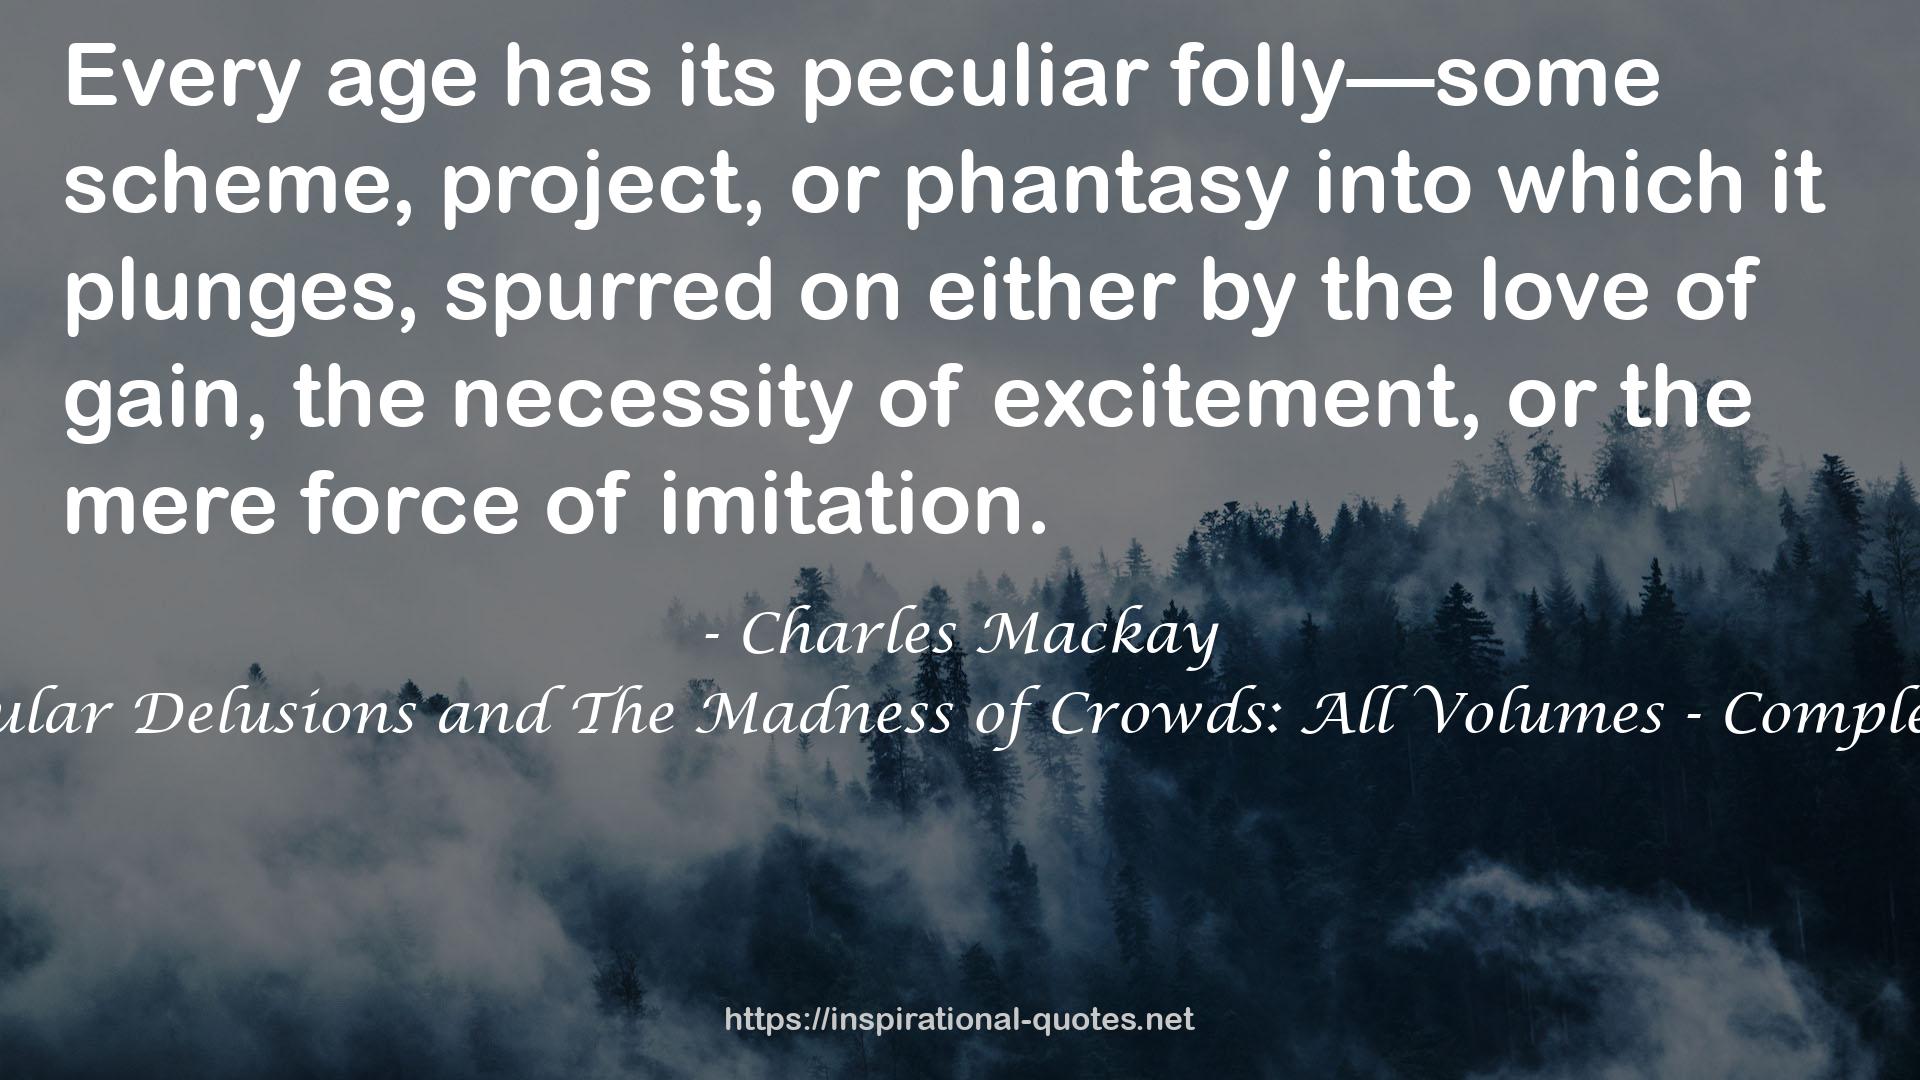 Extraordinary Popular Delusions and The Madness of Crowds: All Volumes - Complete and Unabridged QUOTES